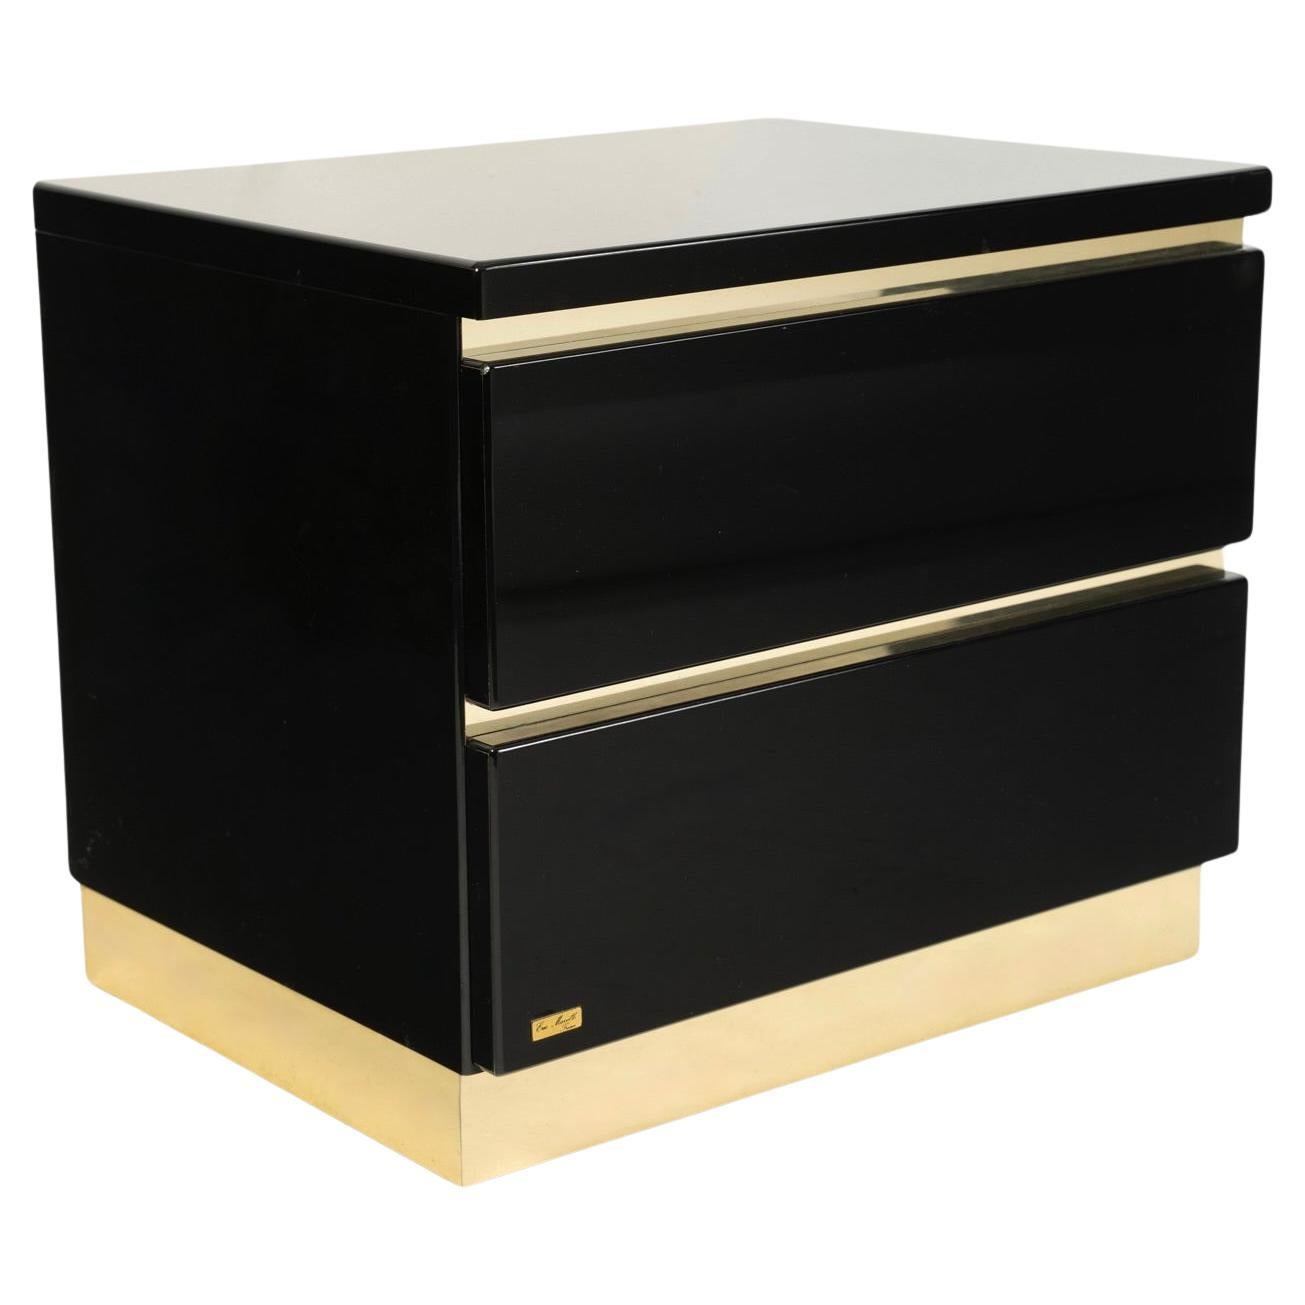 Composed of a rectangular cube in black acrylic-lacquered wood, highlighted at the base by a wide band of gilded brass.
It features two drawers opening from the front, highlighted at the top of each drawer by a gilded brass band.
The signature plate